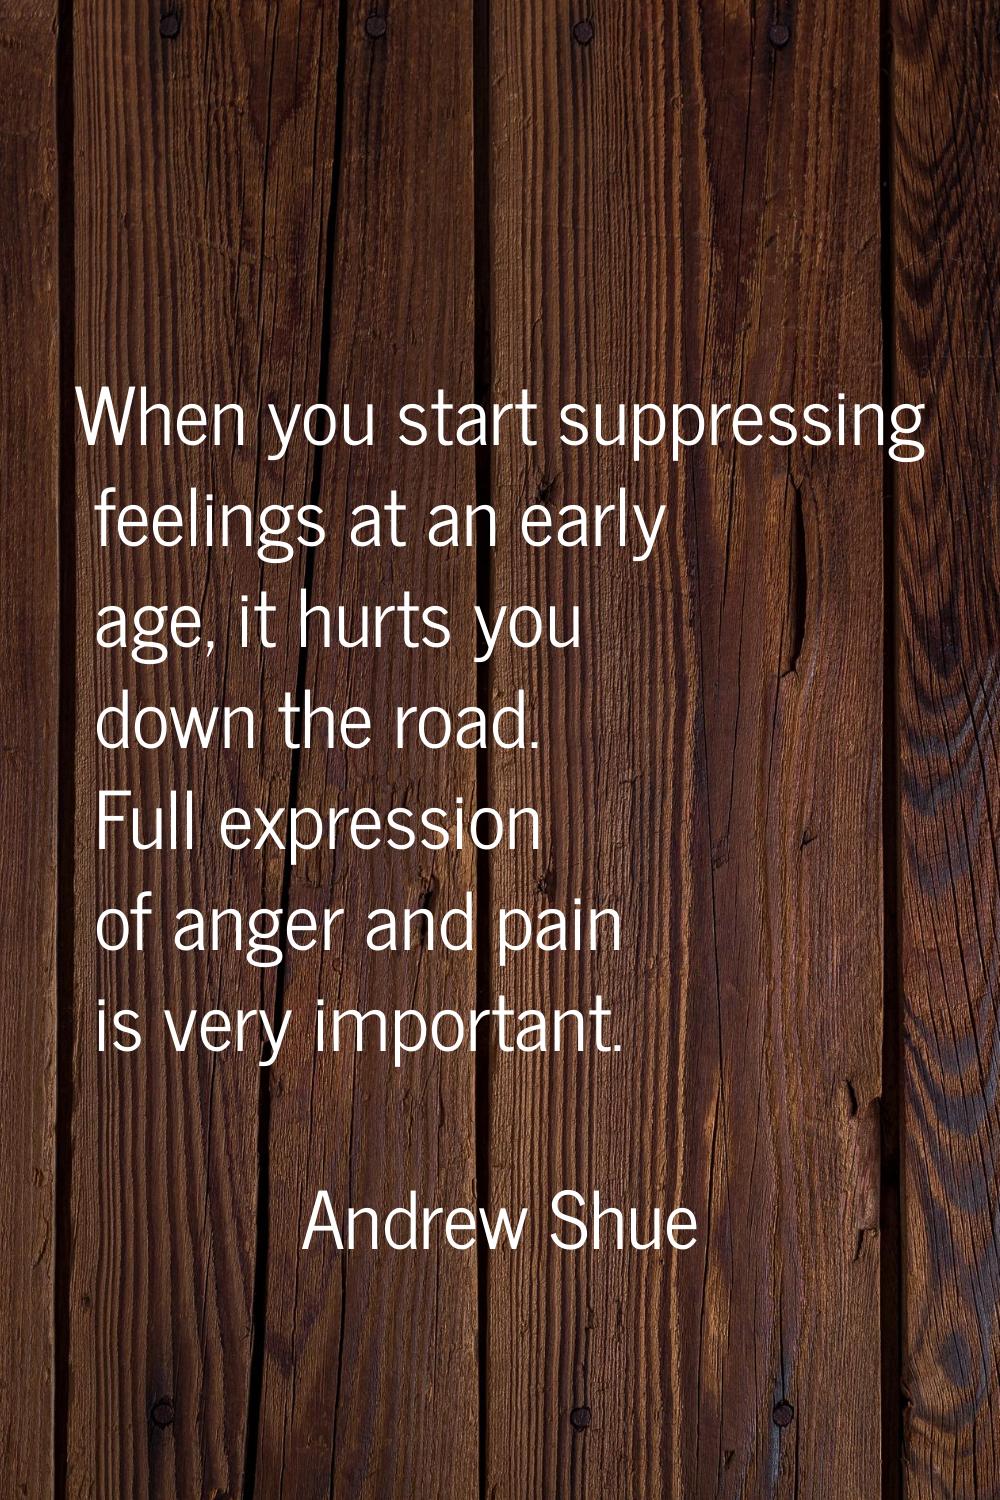 When you start suppressing feelings at an early age, it hurts you down the road. Full expression of